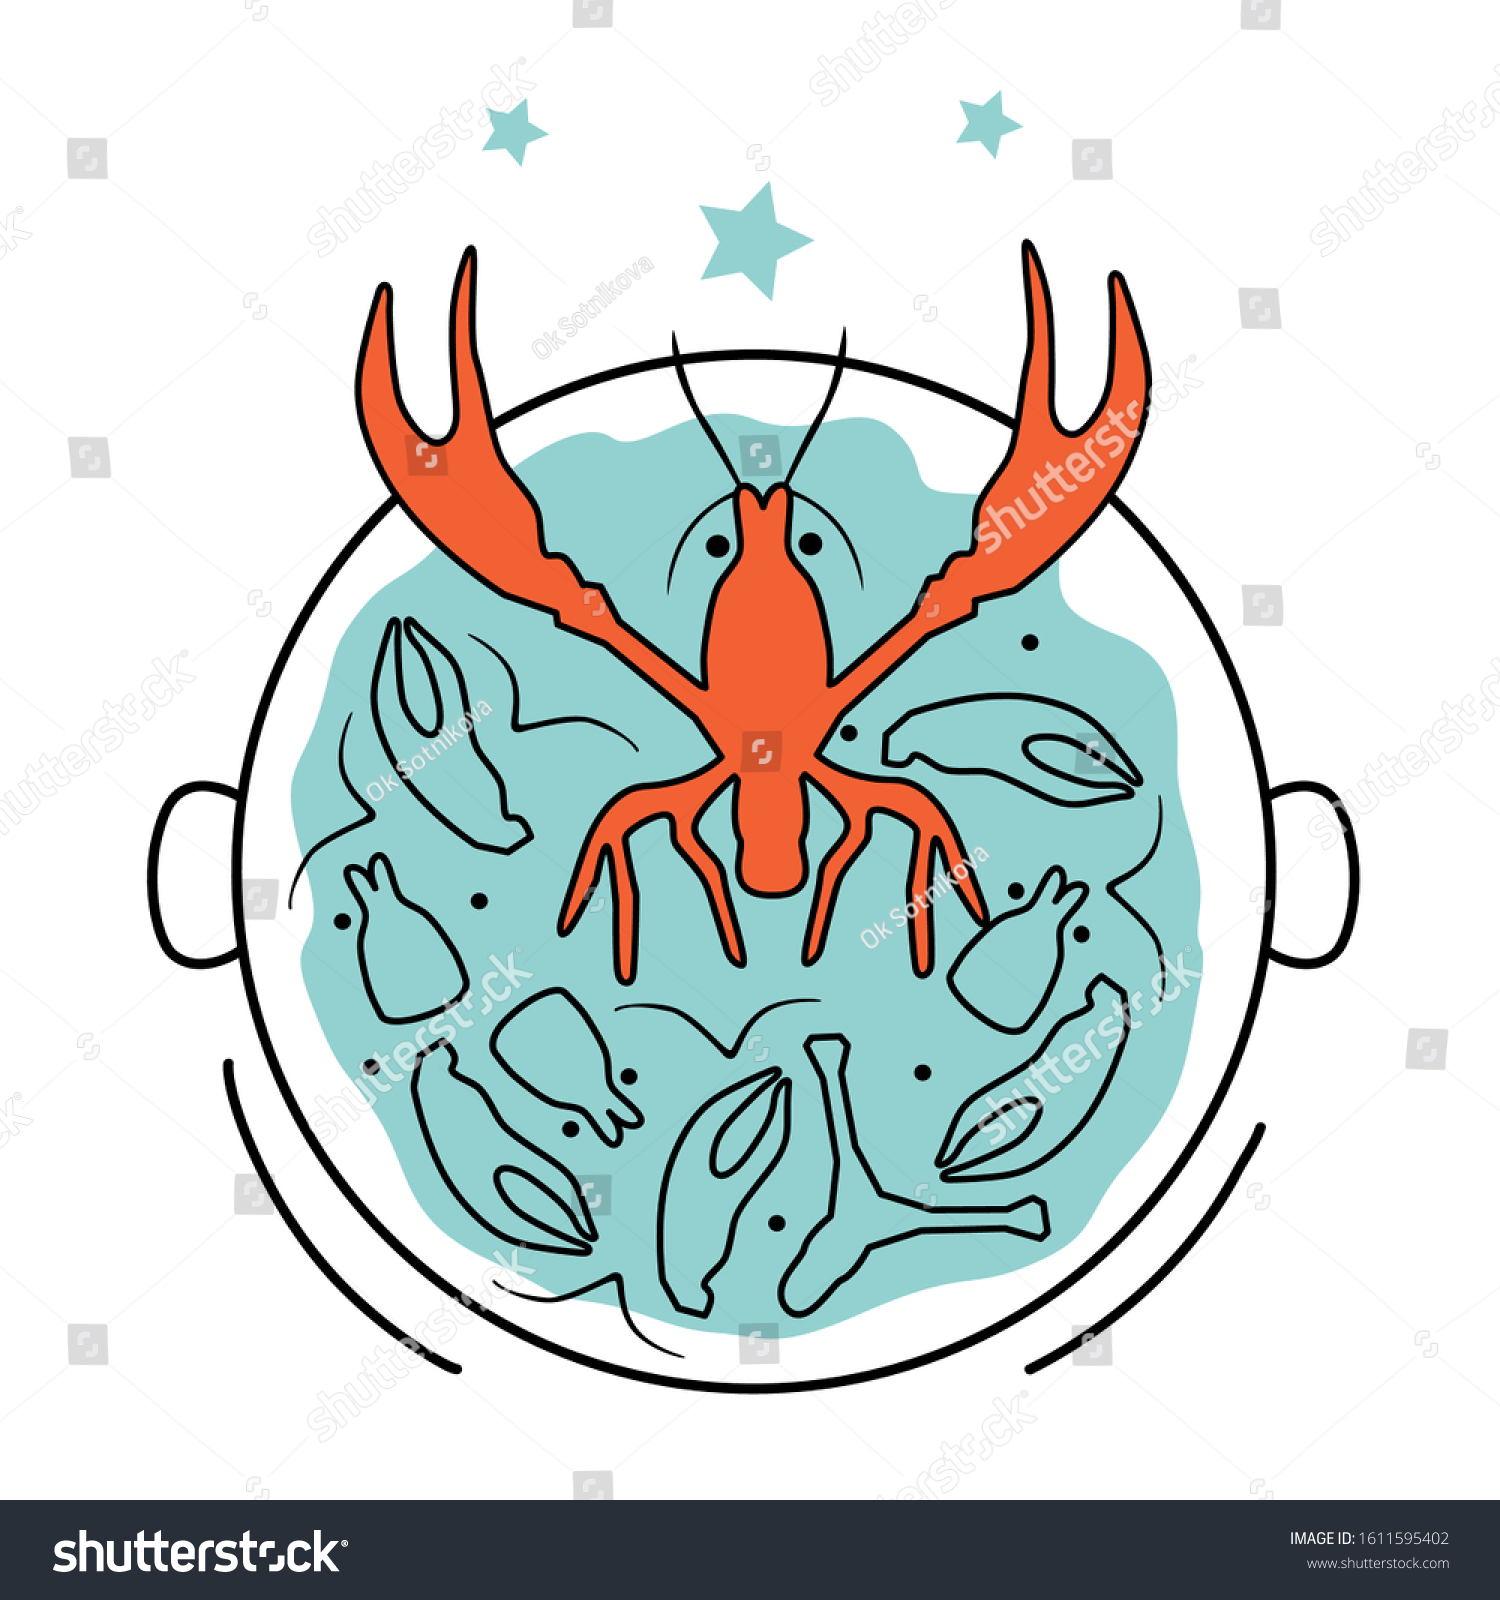 SVG of Vector illustration of crabs in a bucket. Psychological concept, metaphor, Crab mentality, way of thinking. svg